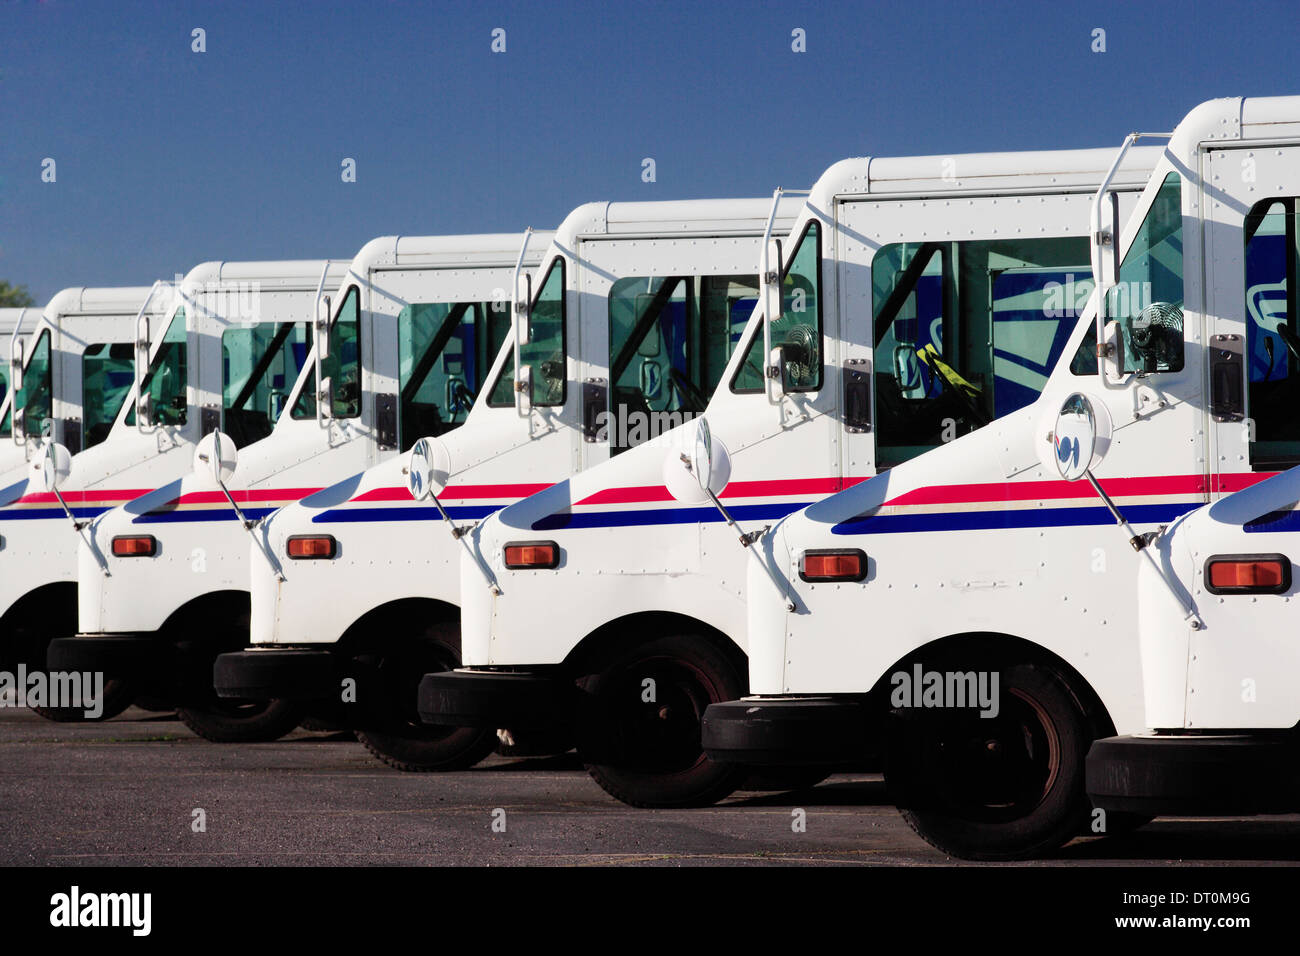 A row of US Postal service trucks parked waiting to deliver the mail. Stock Photo